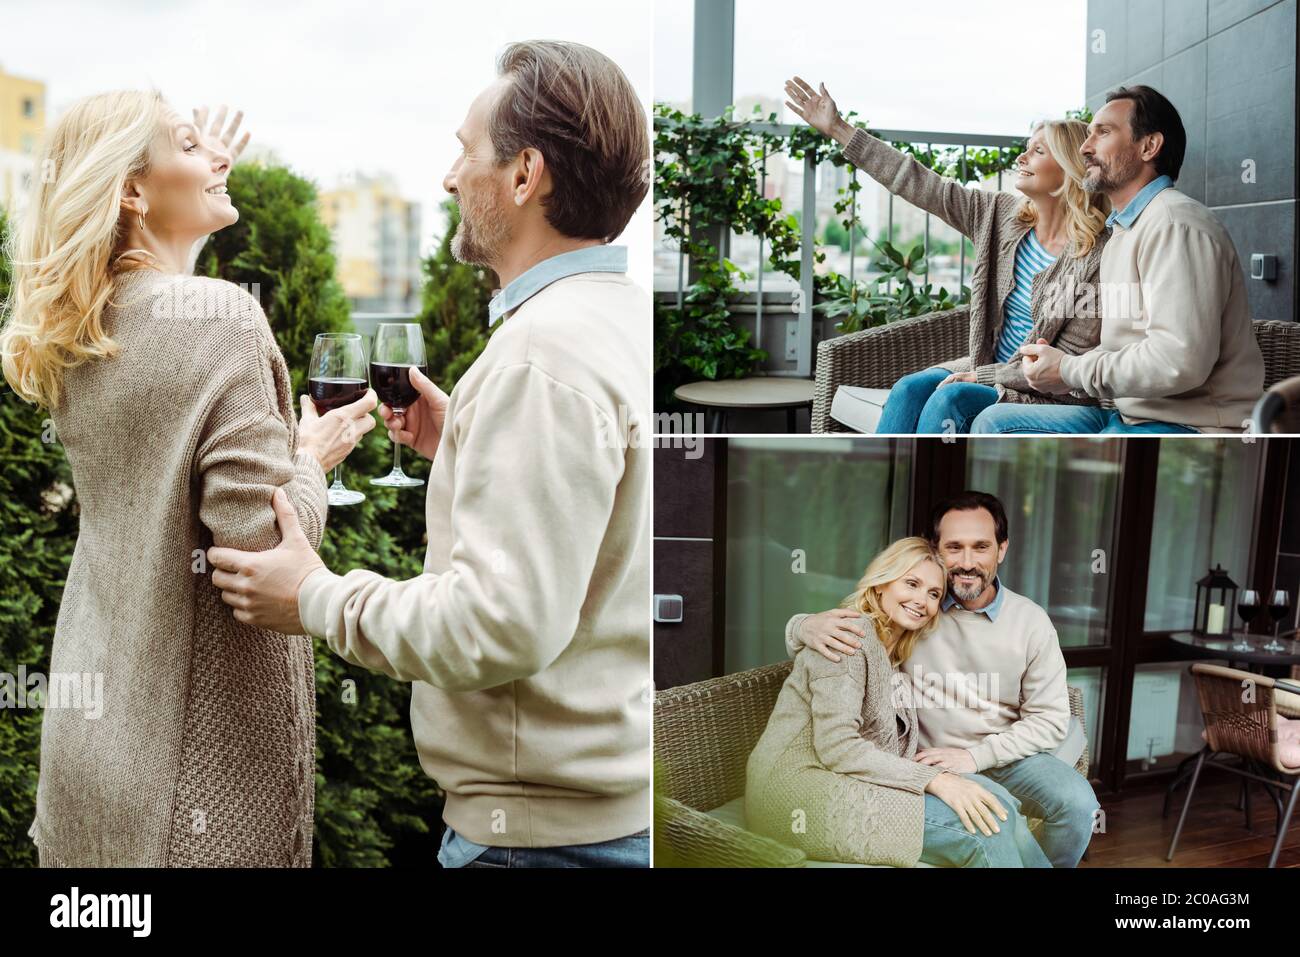 Collage of mature couple embracing and drinking wine on terrace Stock Photo